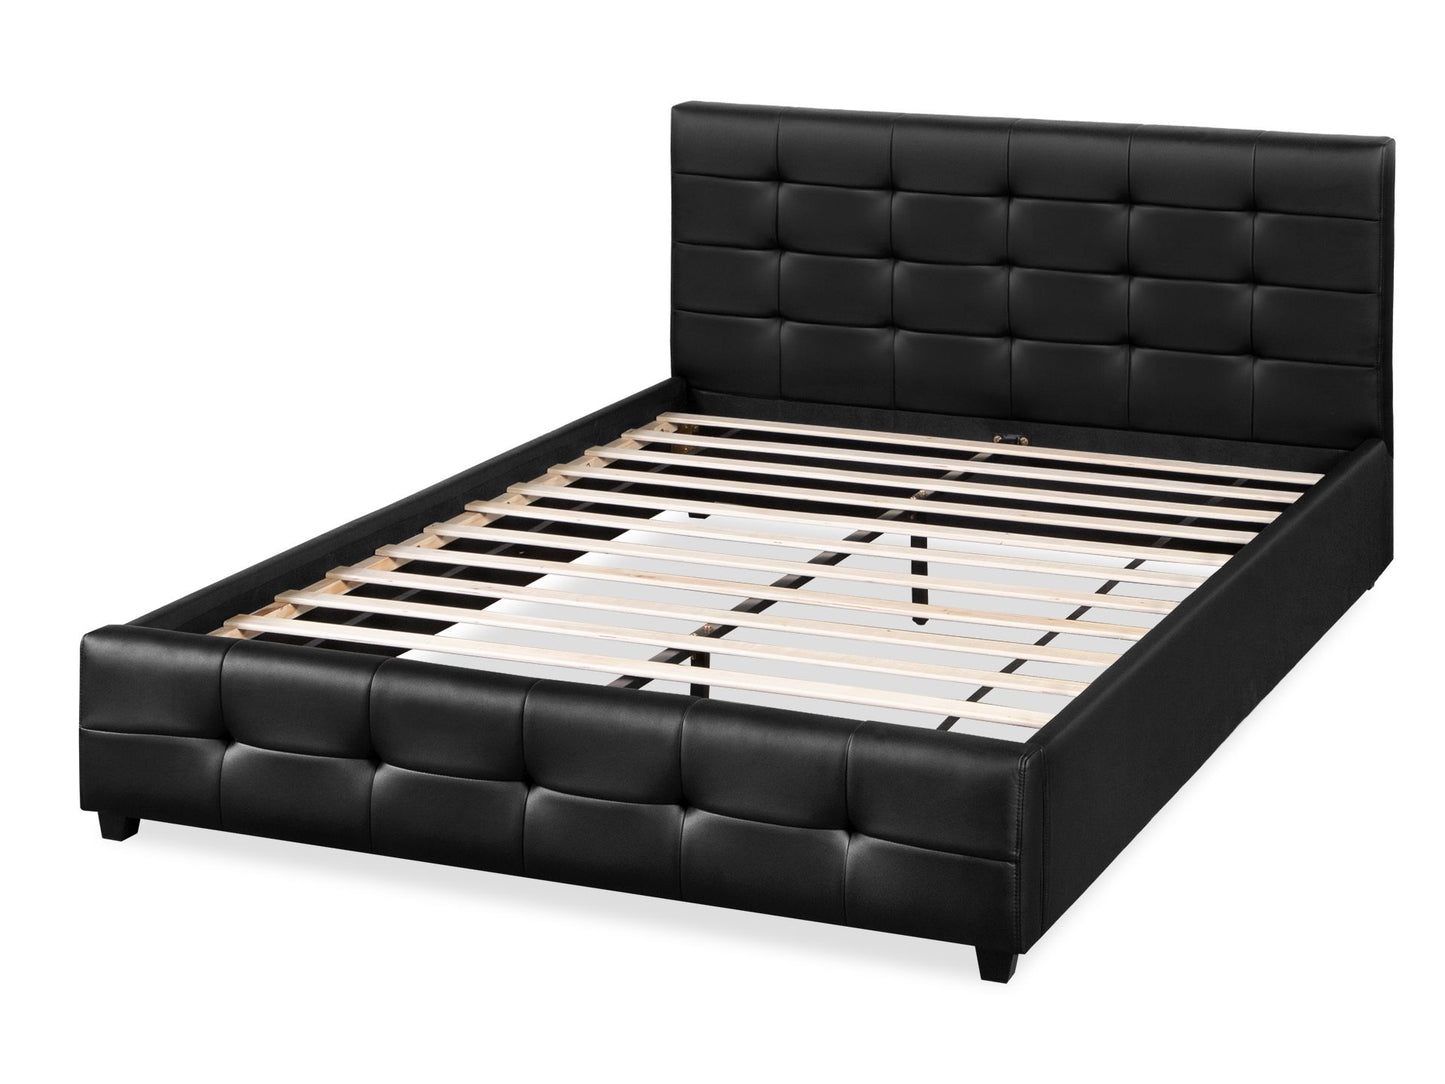 Air Leather Queen PU Bed Frame - Black